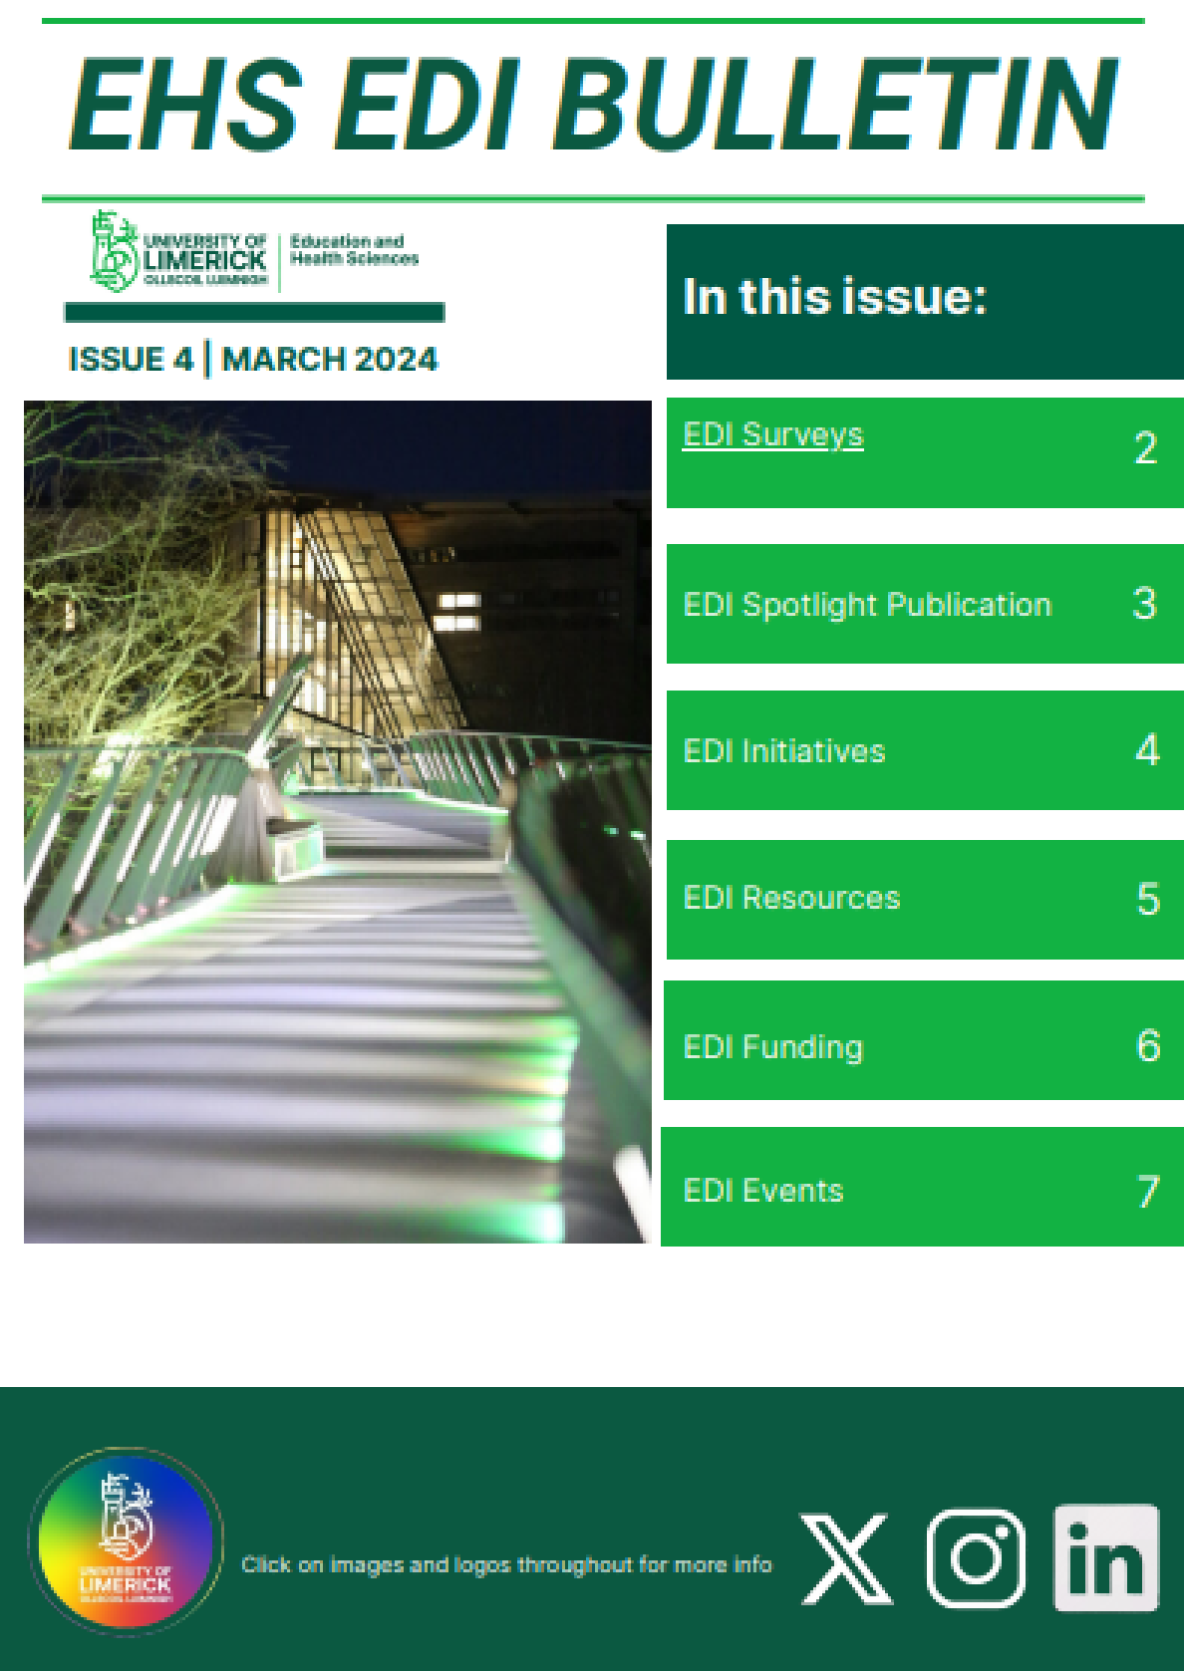 Cover Page of EHS EDI News Bulletin Issue 4 March 2024